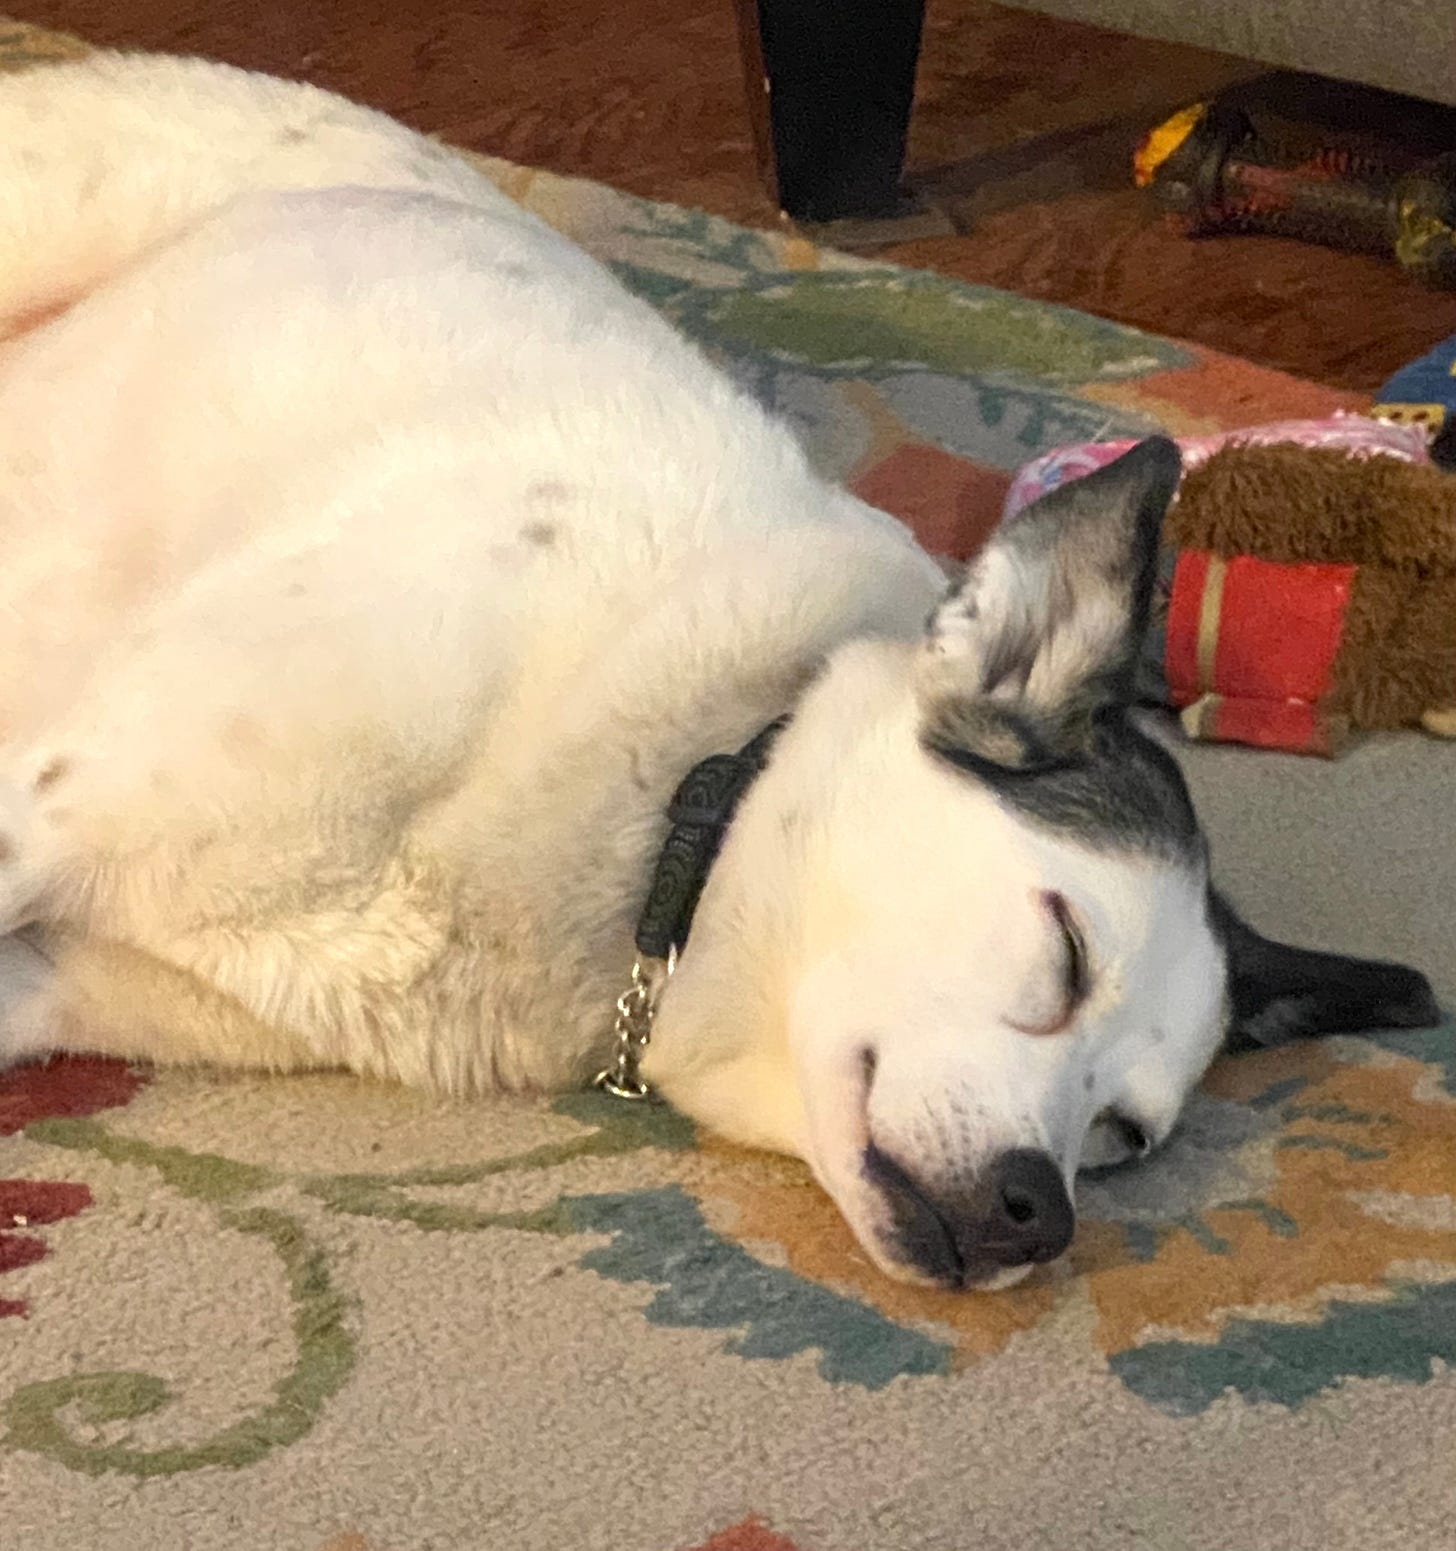 White dog with black spots and brown and black ears smiling while asleep on a multi-colored floral rug. She is surrounded with lots of dog toys.